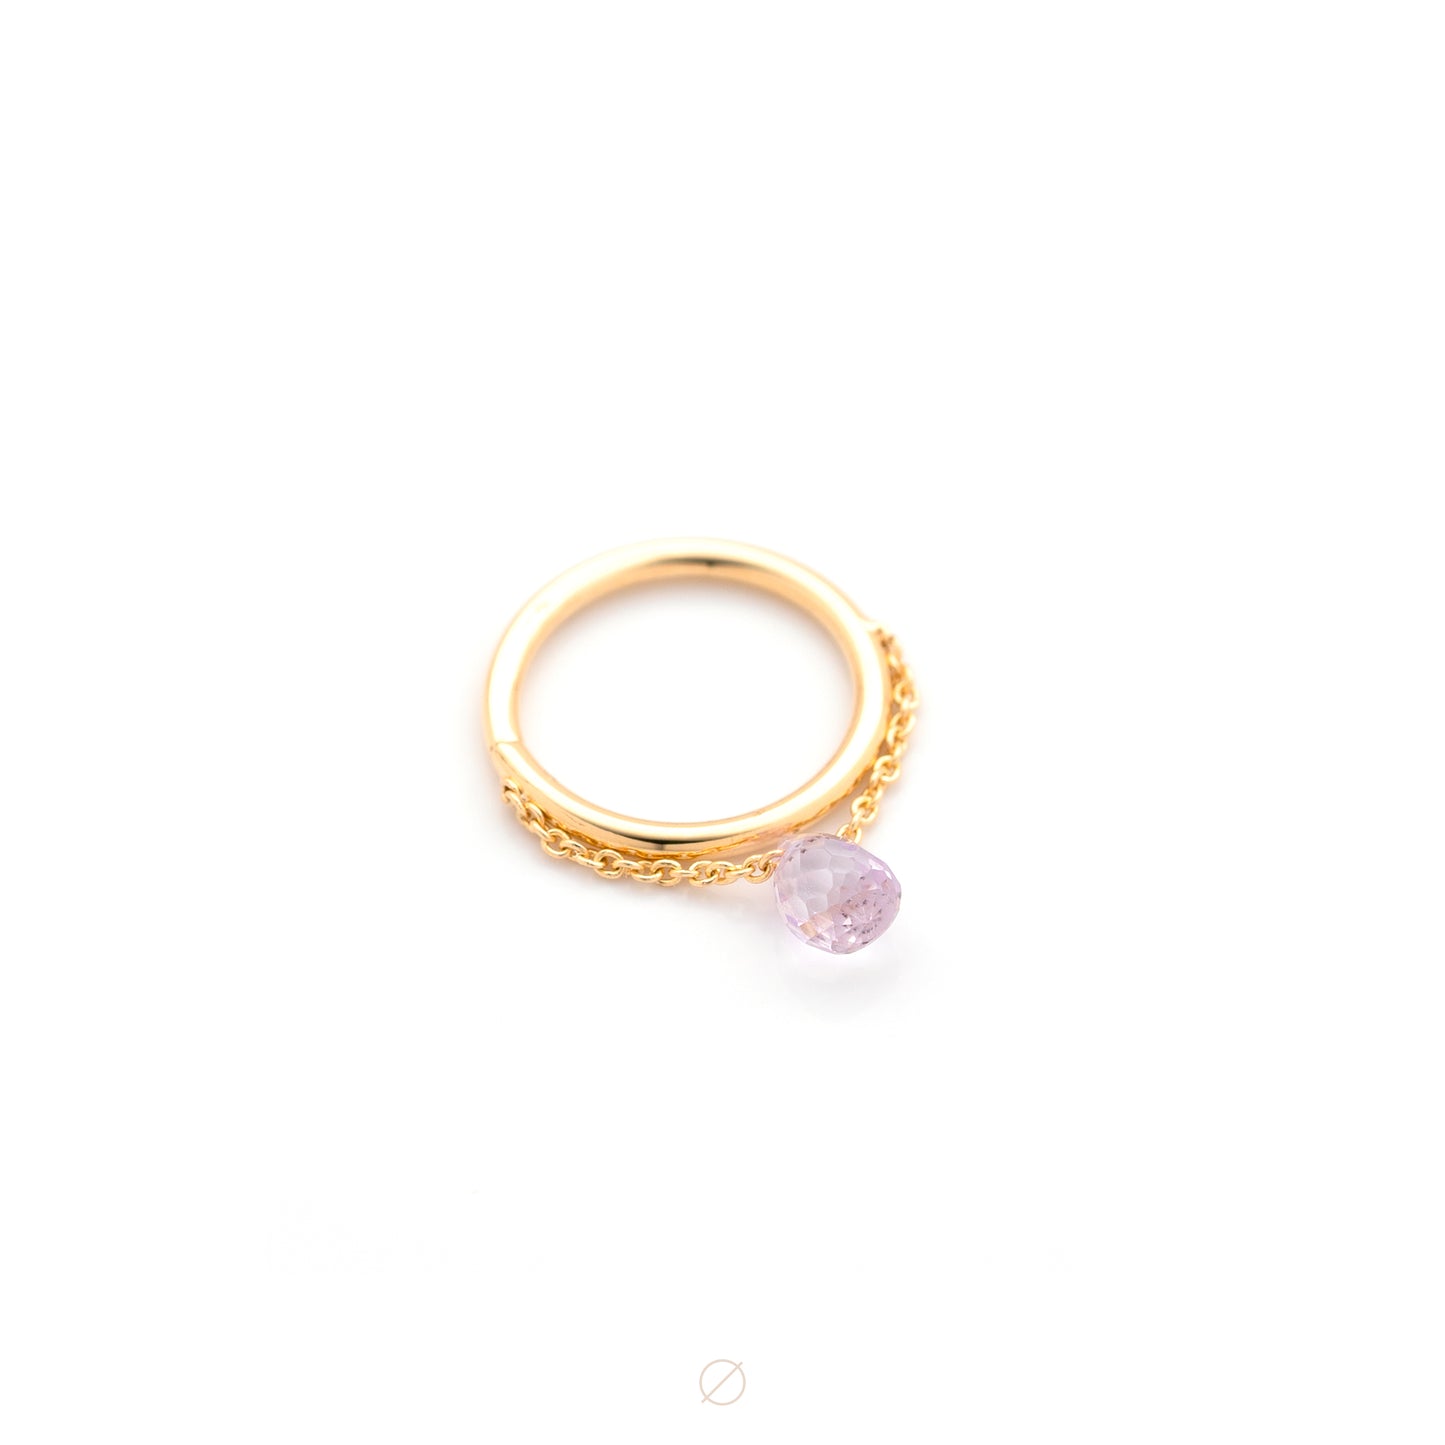 Briolette Chained Seam Ring by Pupil Hall